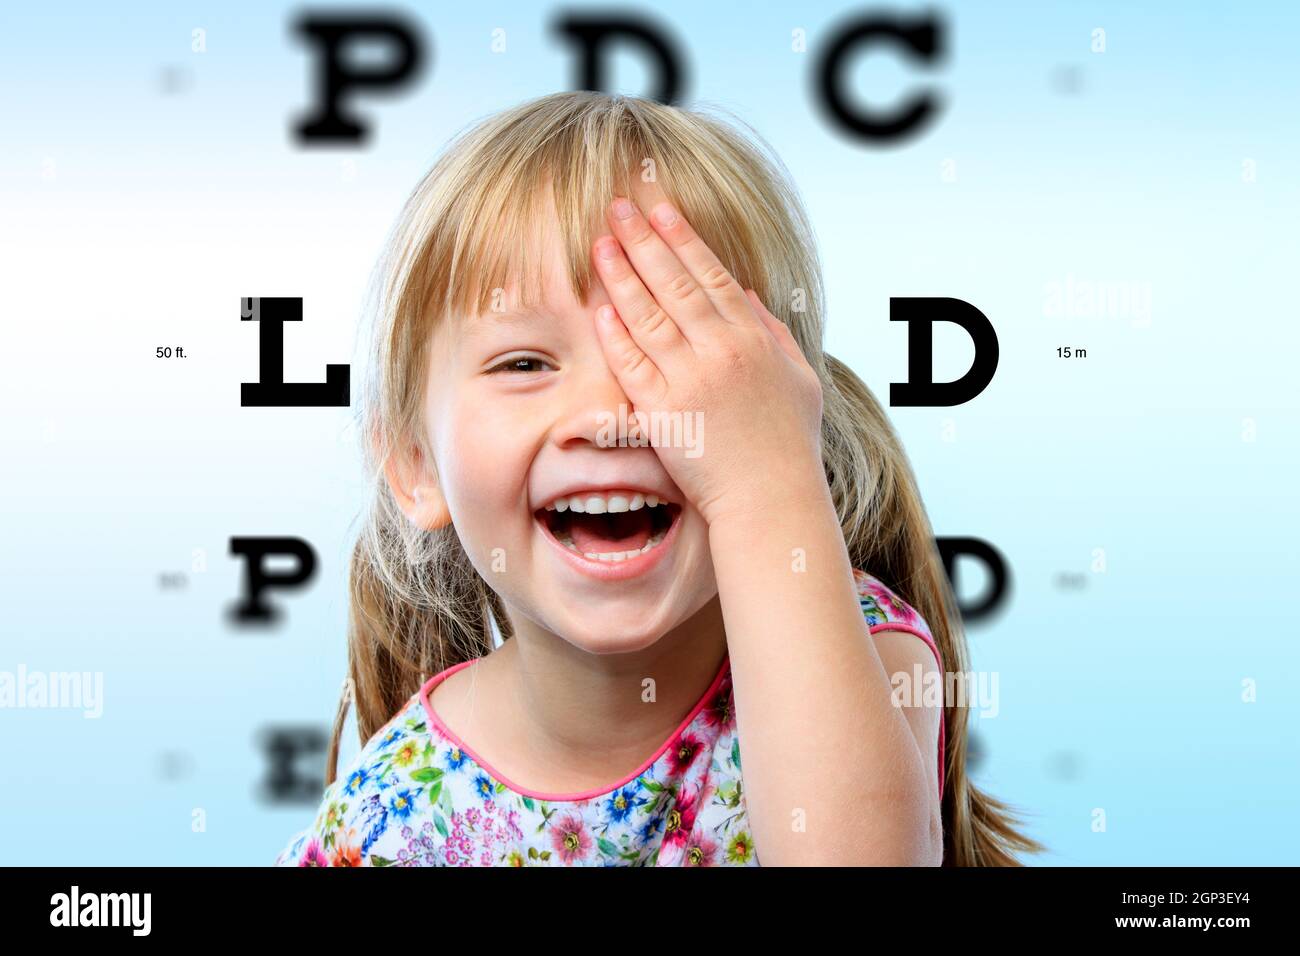 Close up face portrait of happy girl having fun at vision test.Conceptual image with girl closing one eye with hand and block letter eye chart in back Stock Photo